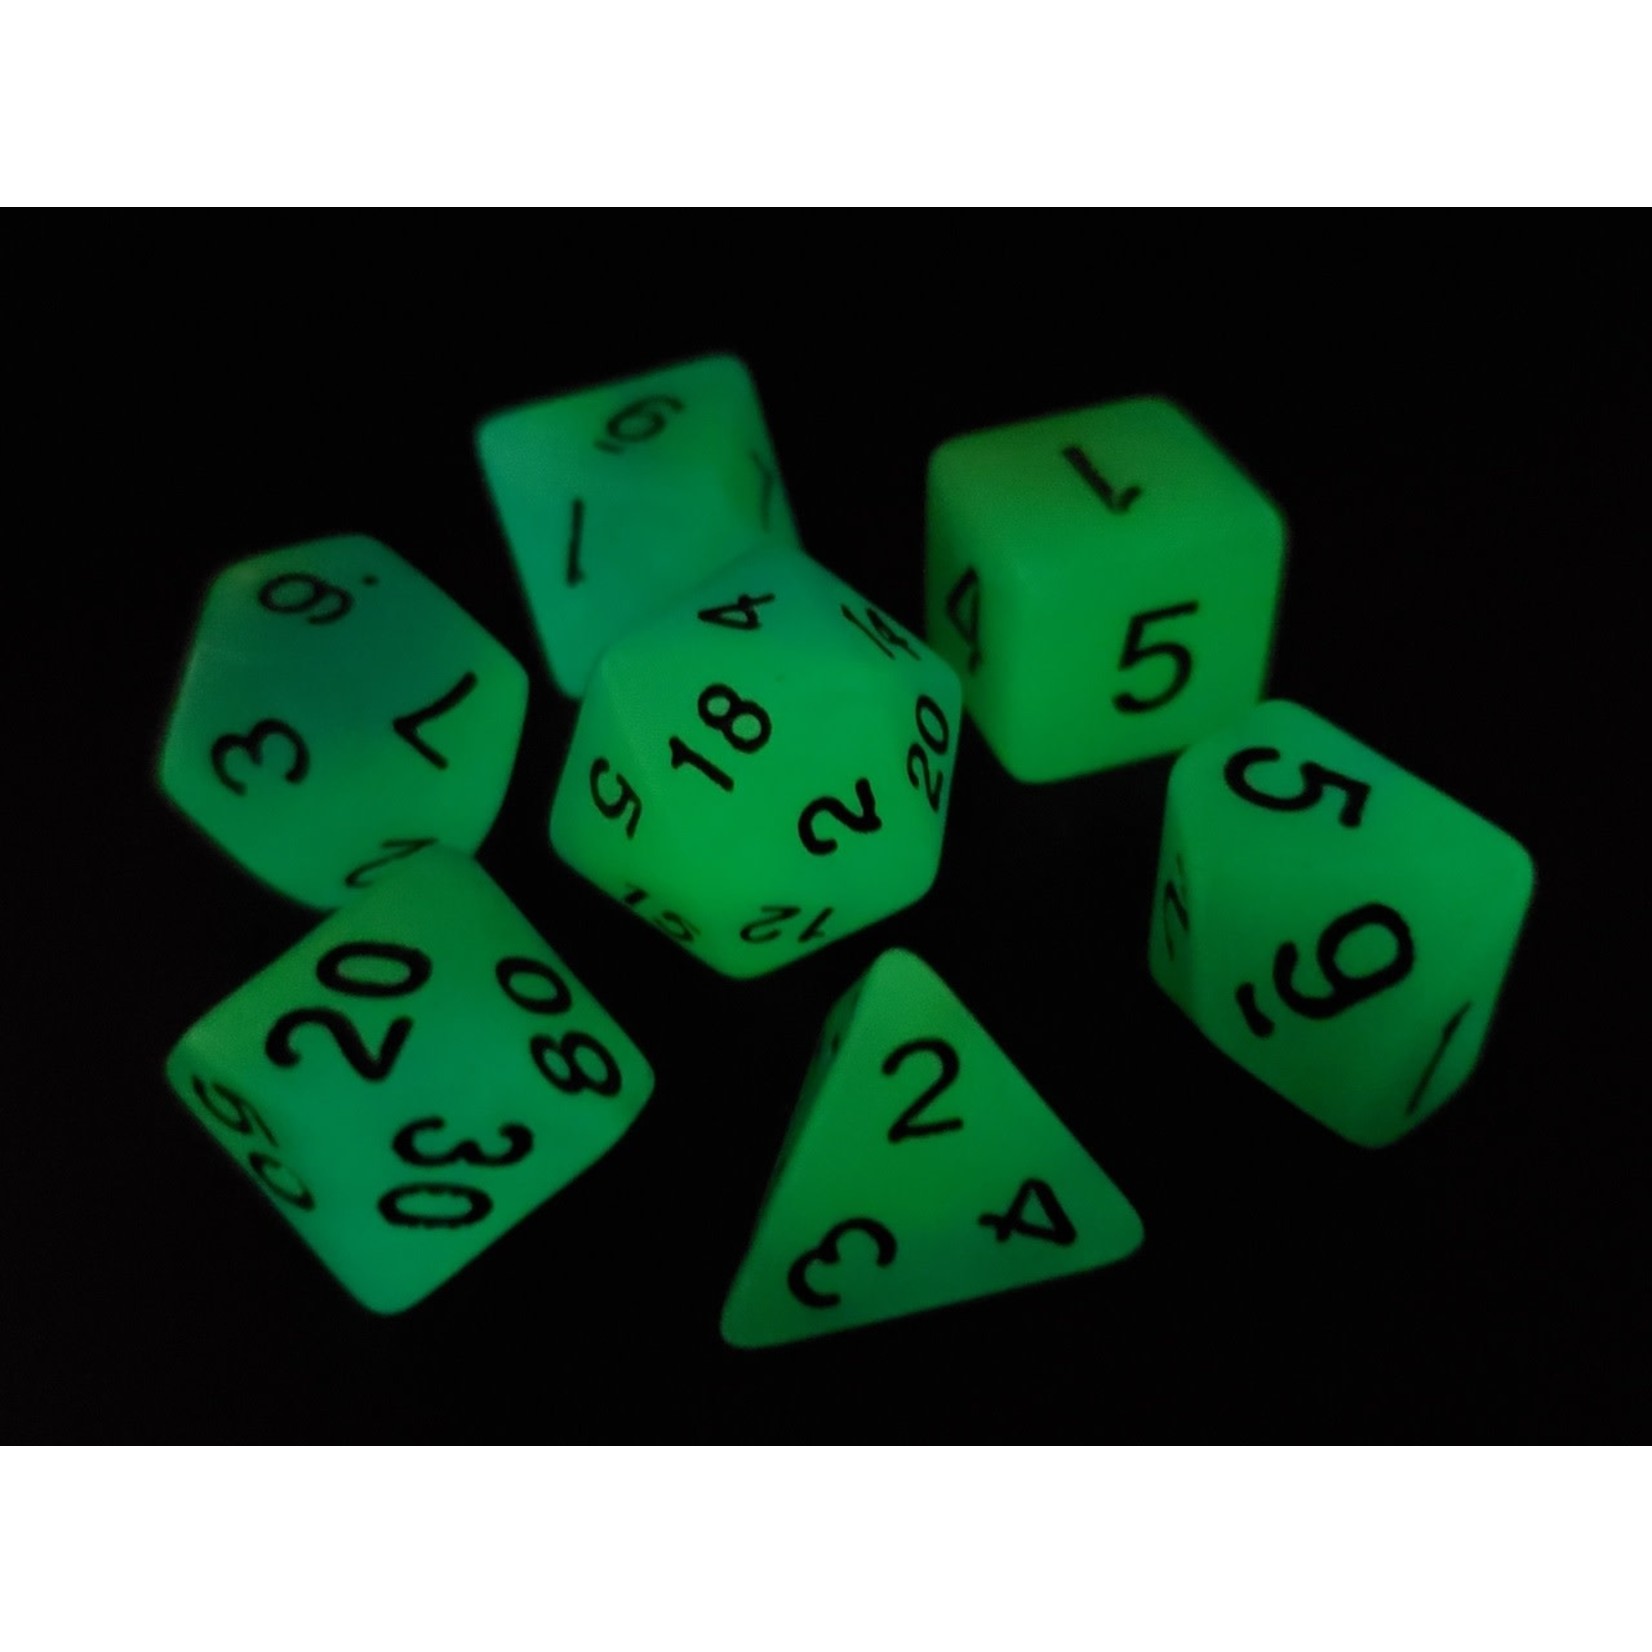 Old School 7 Piece Dice Set: Glow in the Dark - Green and Blue